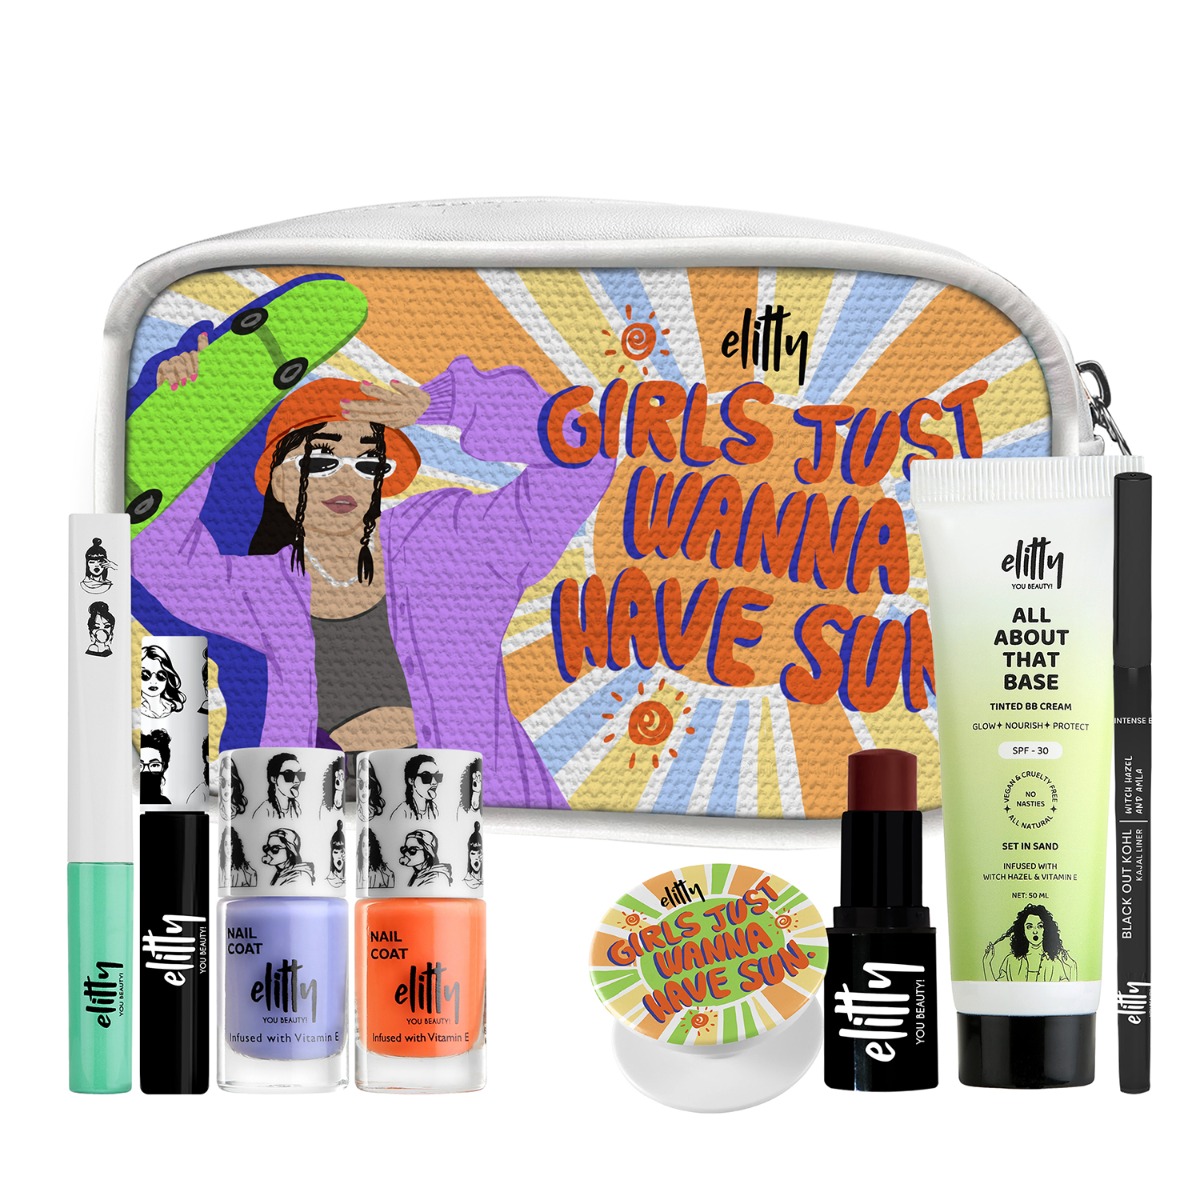 Elitty Girls Just Wanna Have Sun Kit (Medium) - Complete Makeup Kit For Teens, Pack Of 7